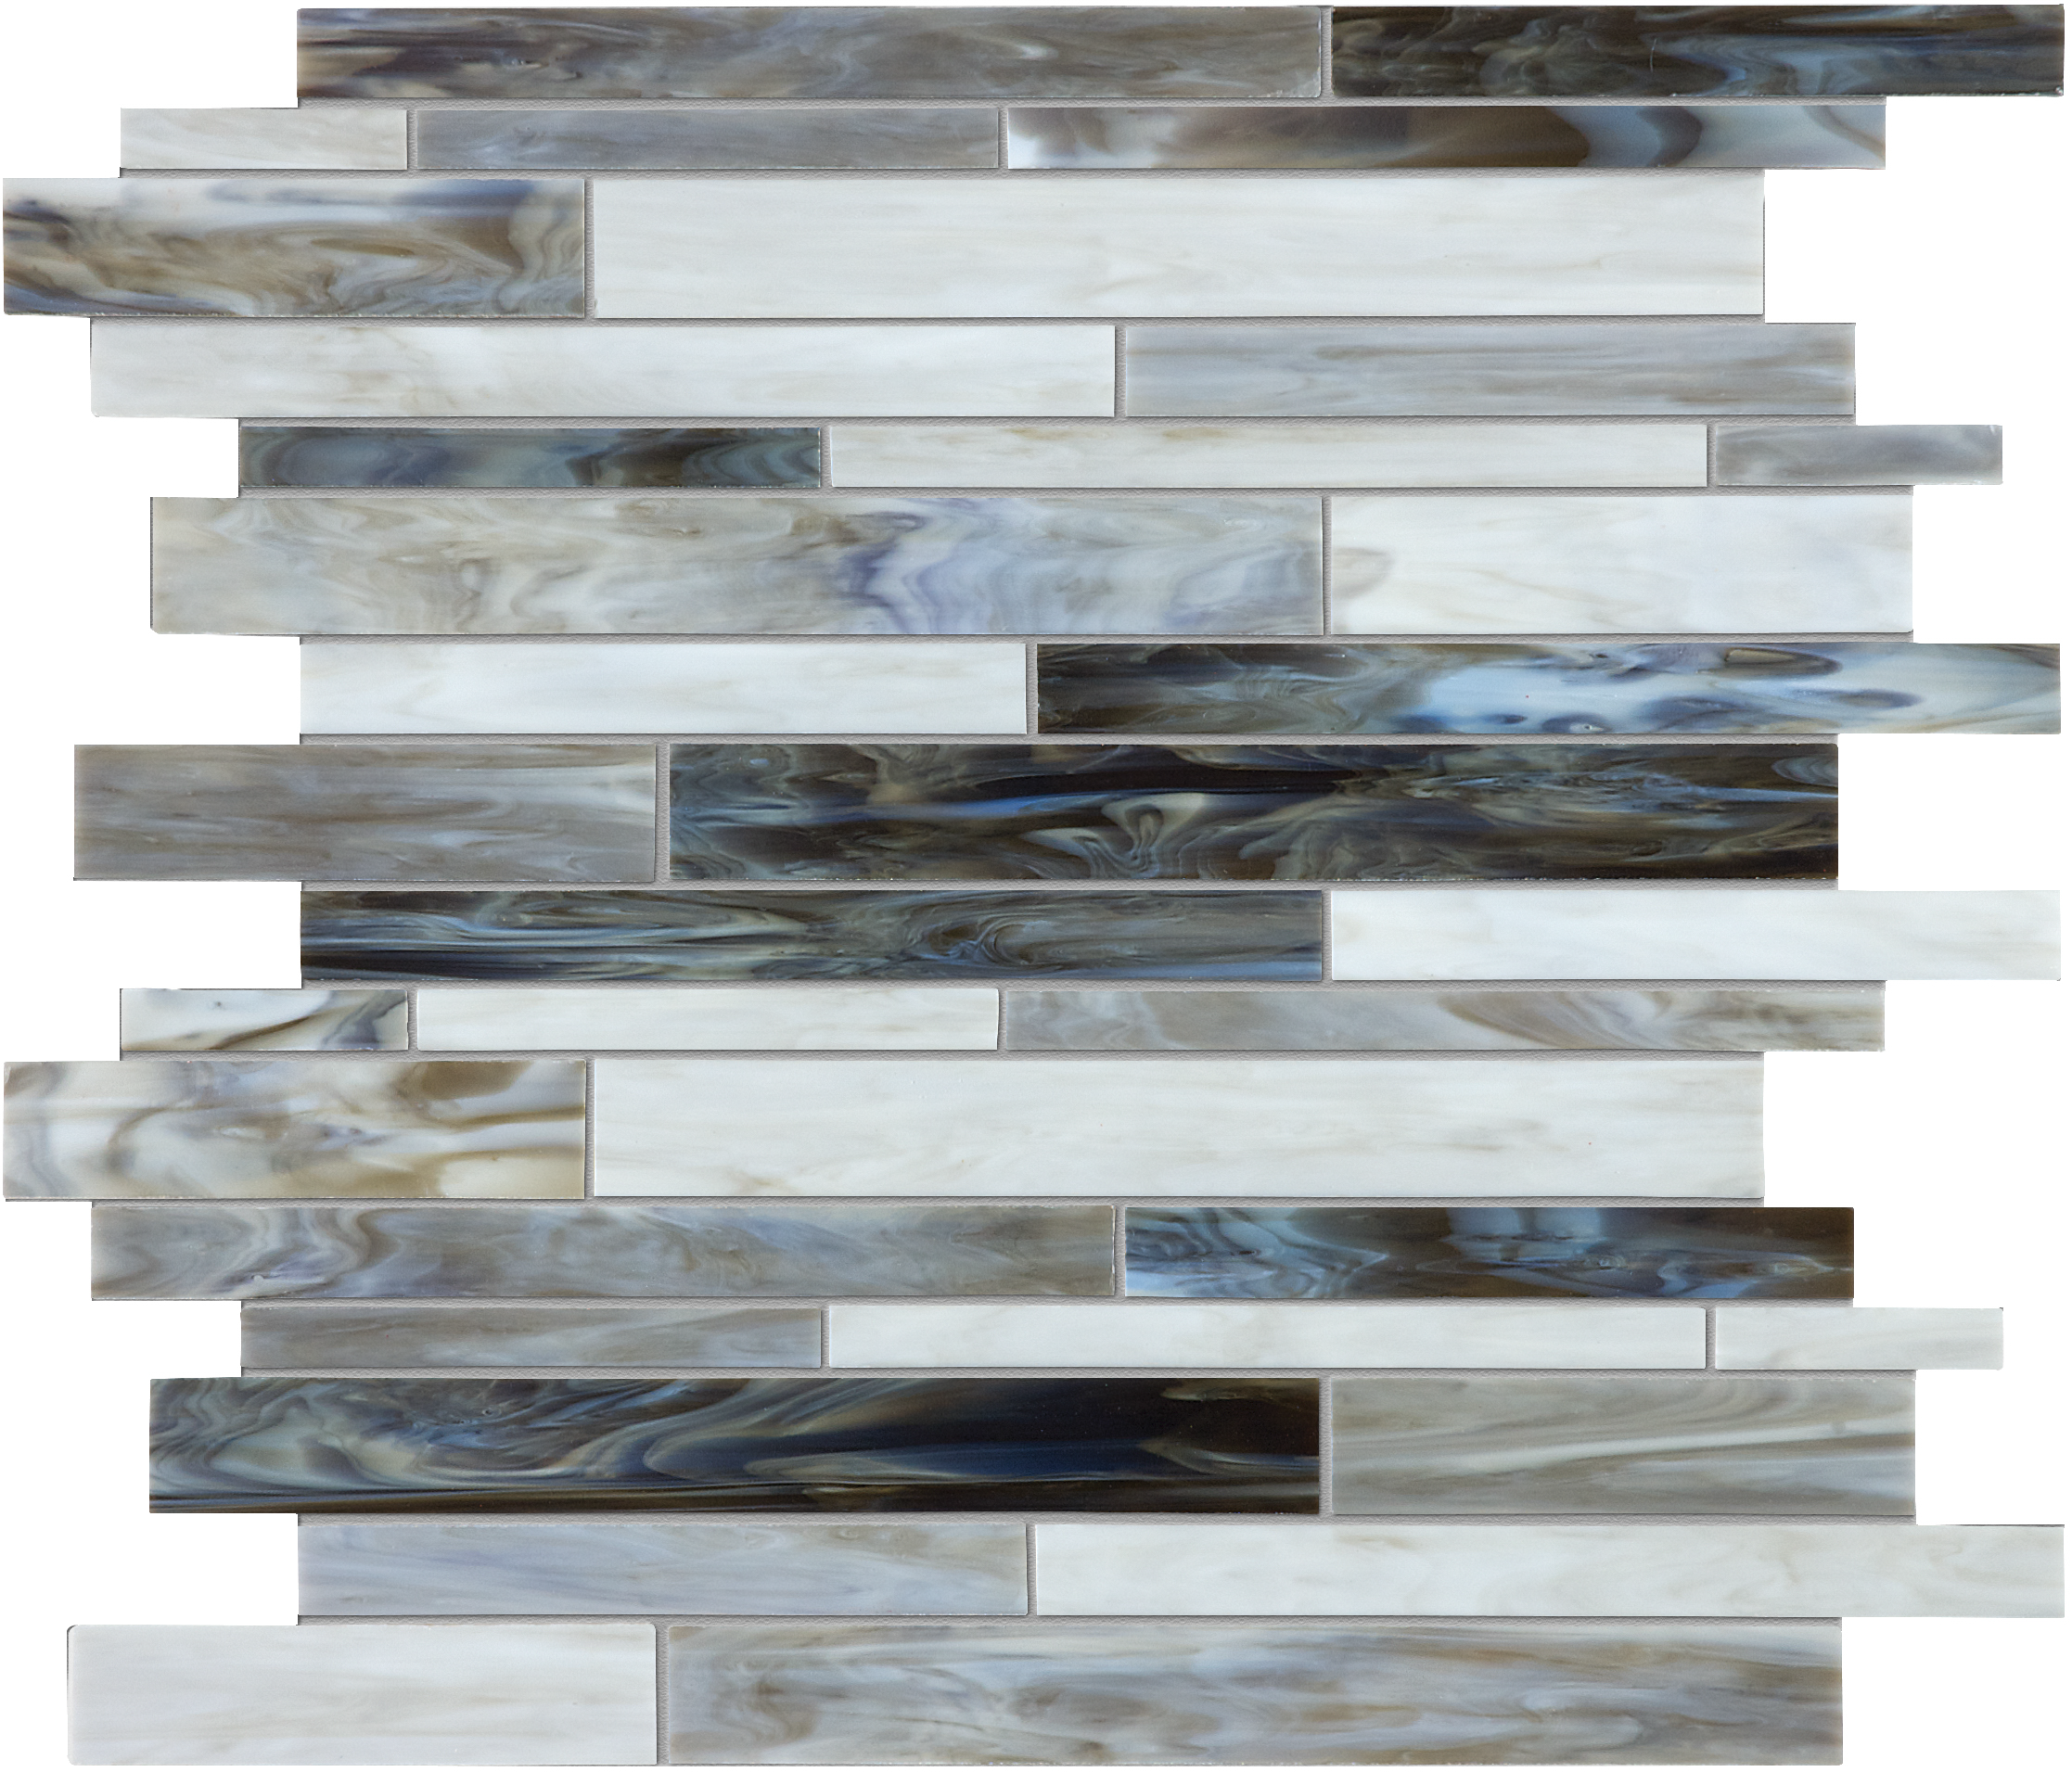 alabastro random strip pattern fused glass mosaic from baroque anatolia collection distributed by surface group international glossy finish rounded edge mesh shape